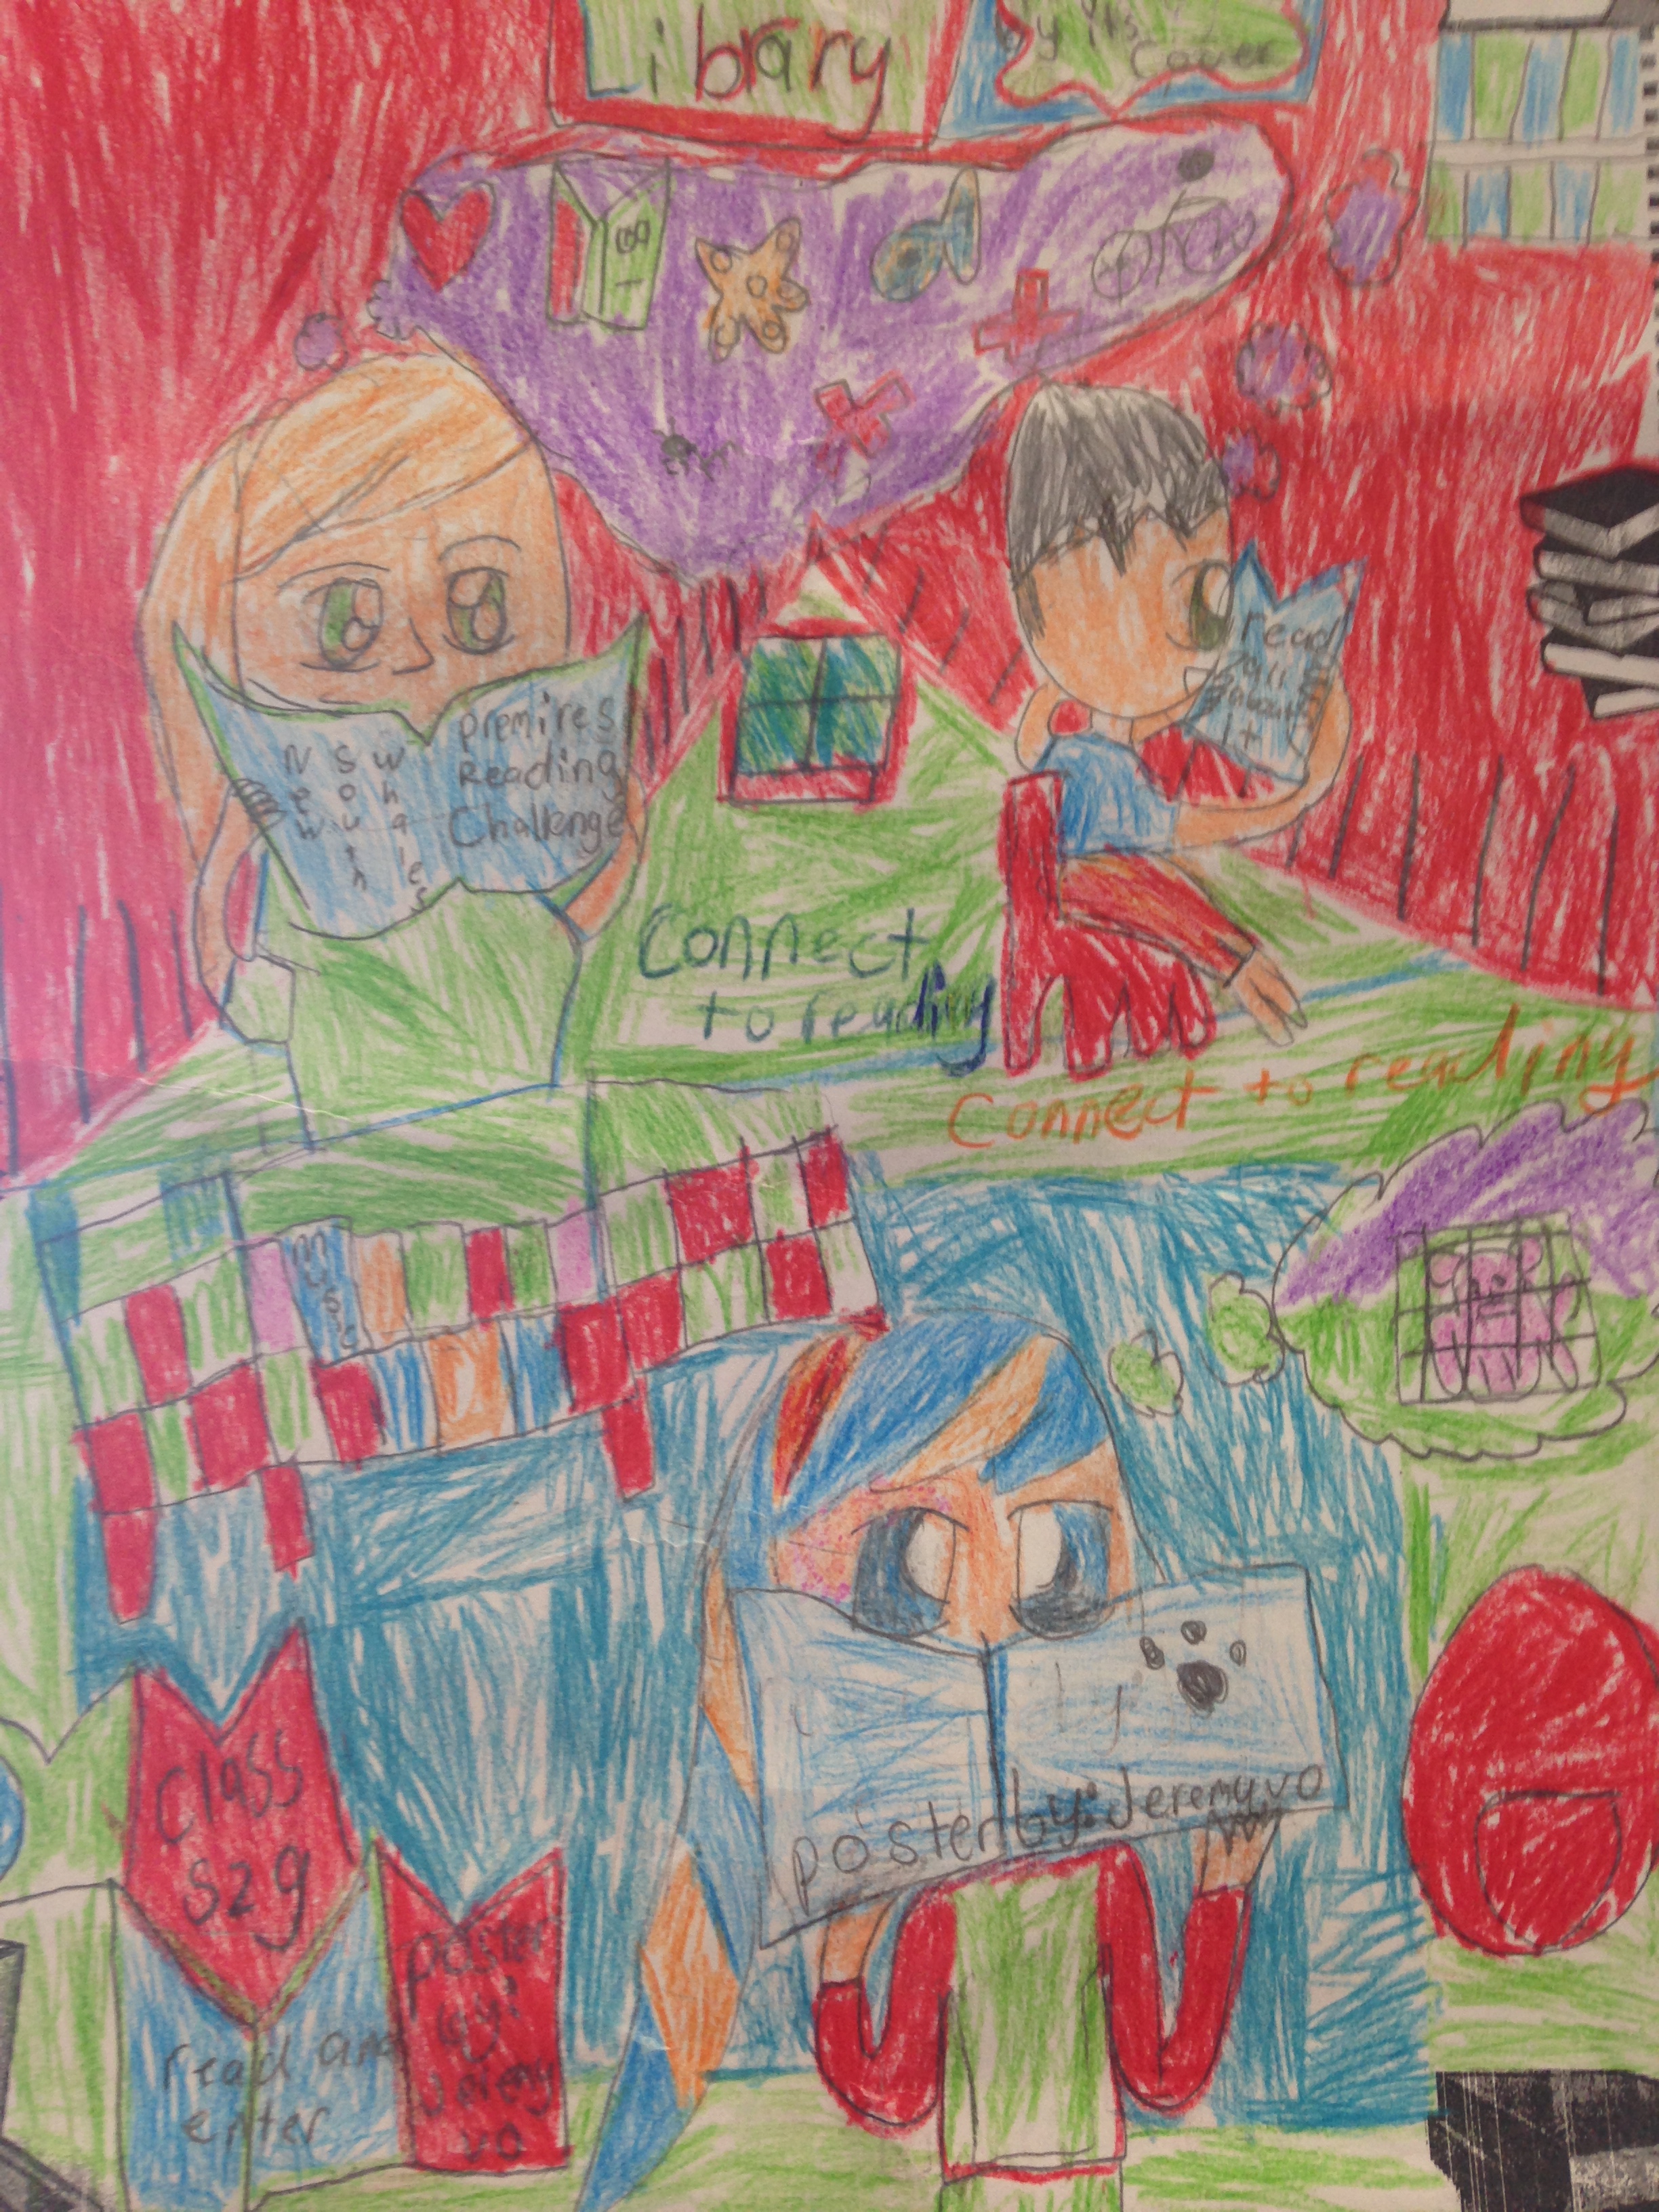 Poster created by a student for book week 2014.